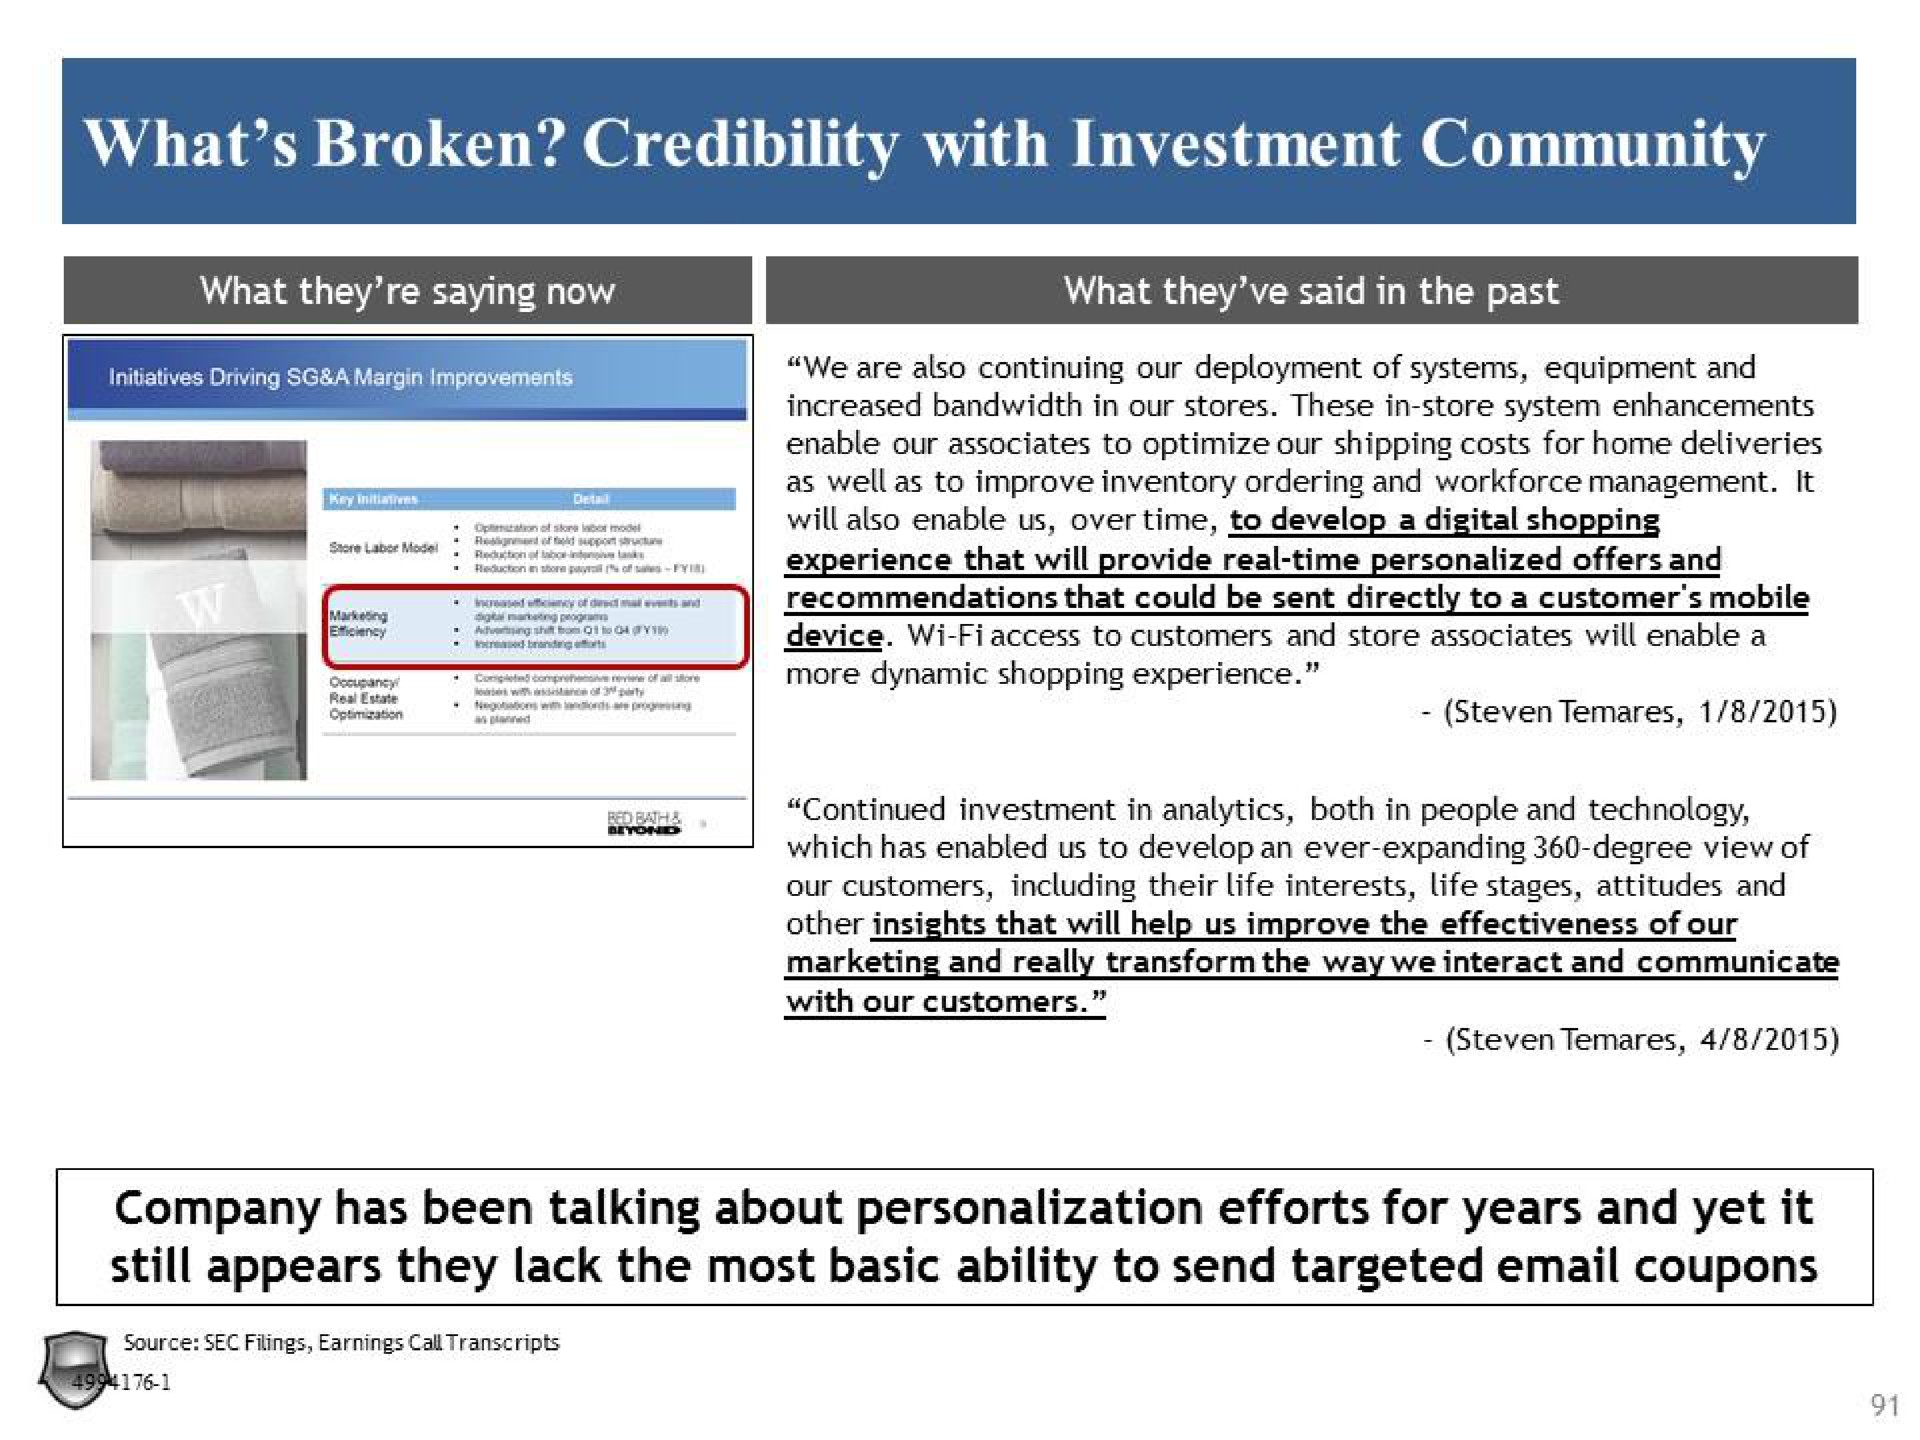 what broken credibility with investment community company has been talking about personalization efforts for years and yet it still appears they lack the most basic ability to send targeted coupons | Legion Partners